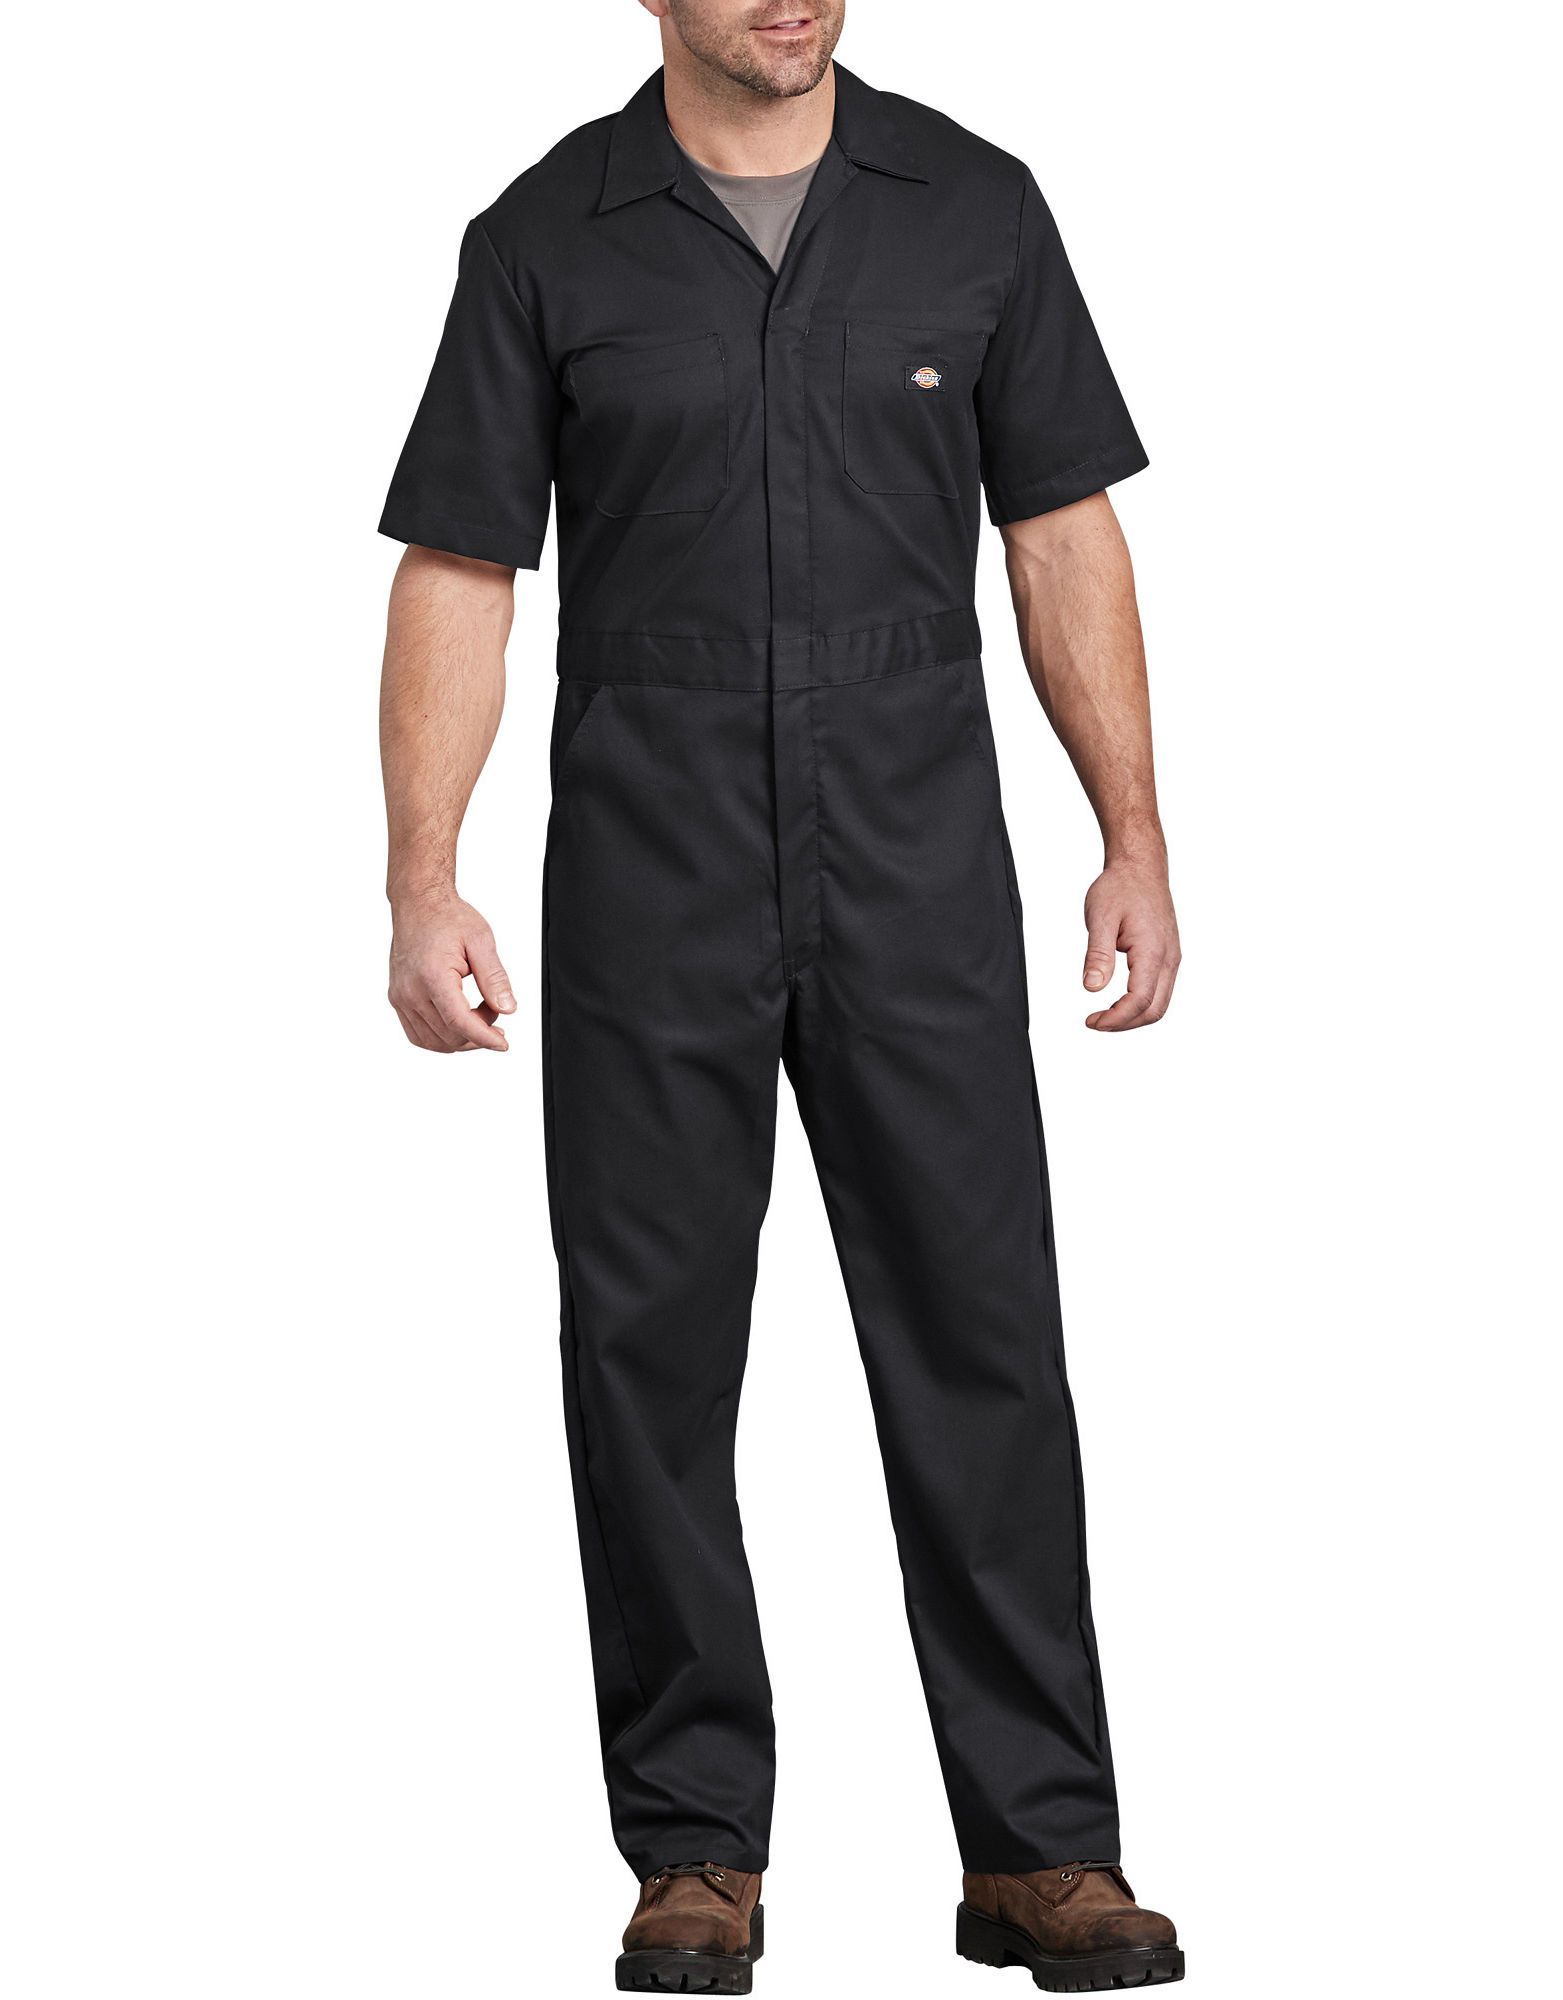 Dickies Men S Coveralls Size Chart